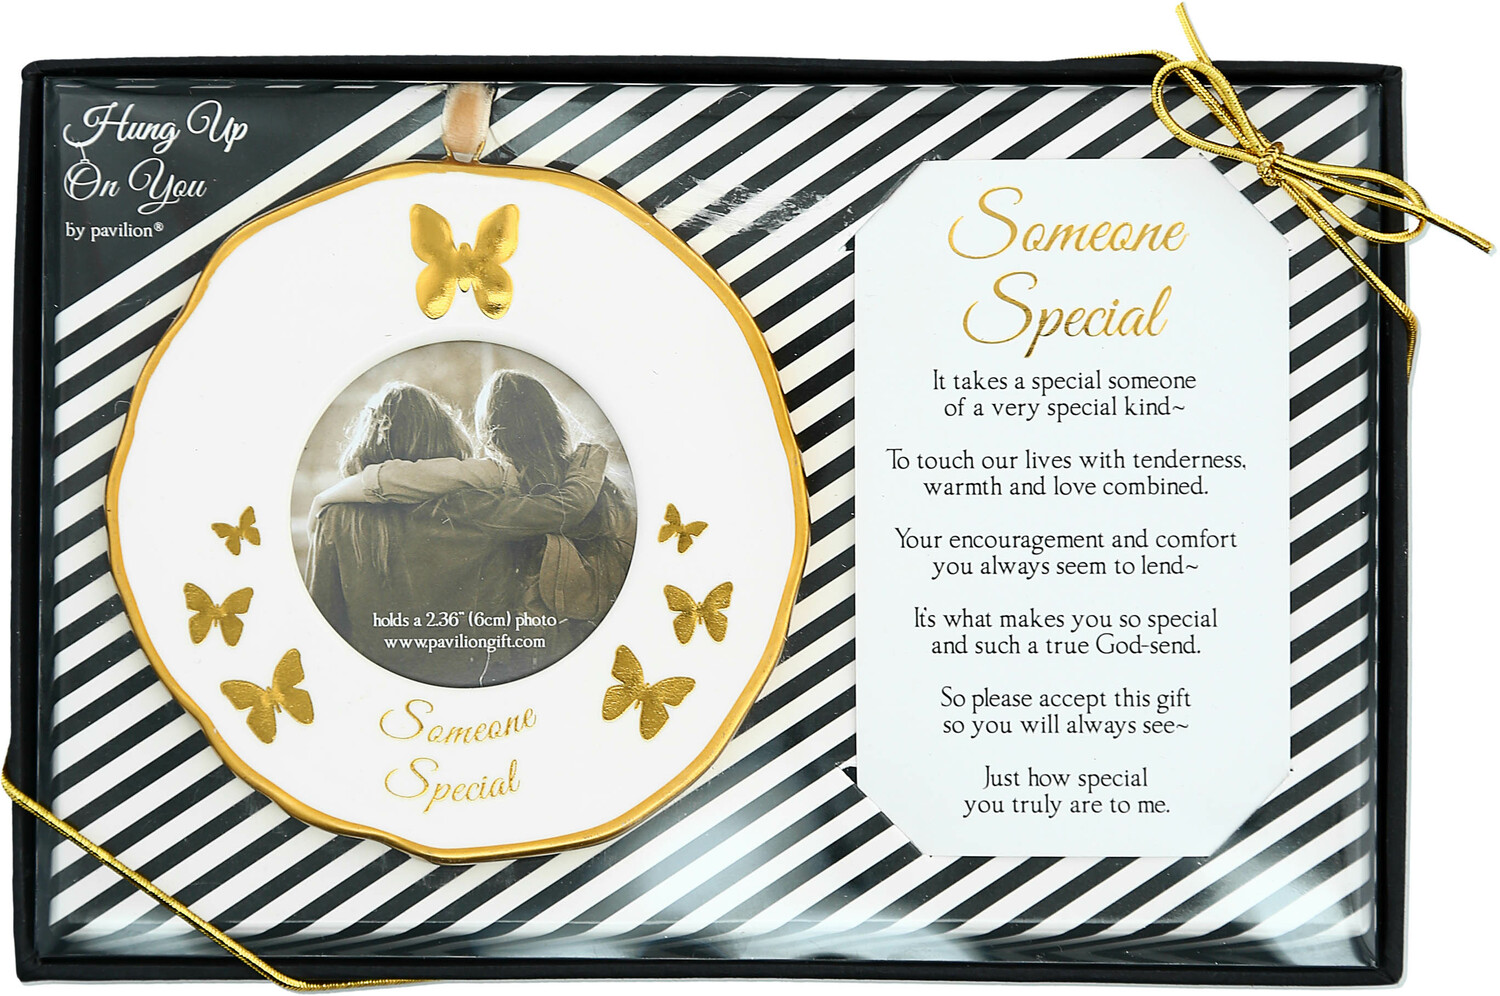 Someone Special  by Hung Up on You - Someone Special  - 4" Photo Frame Ornament
